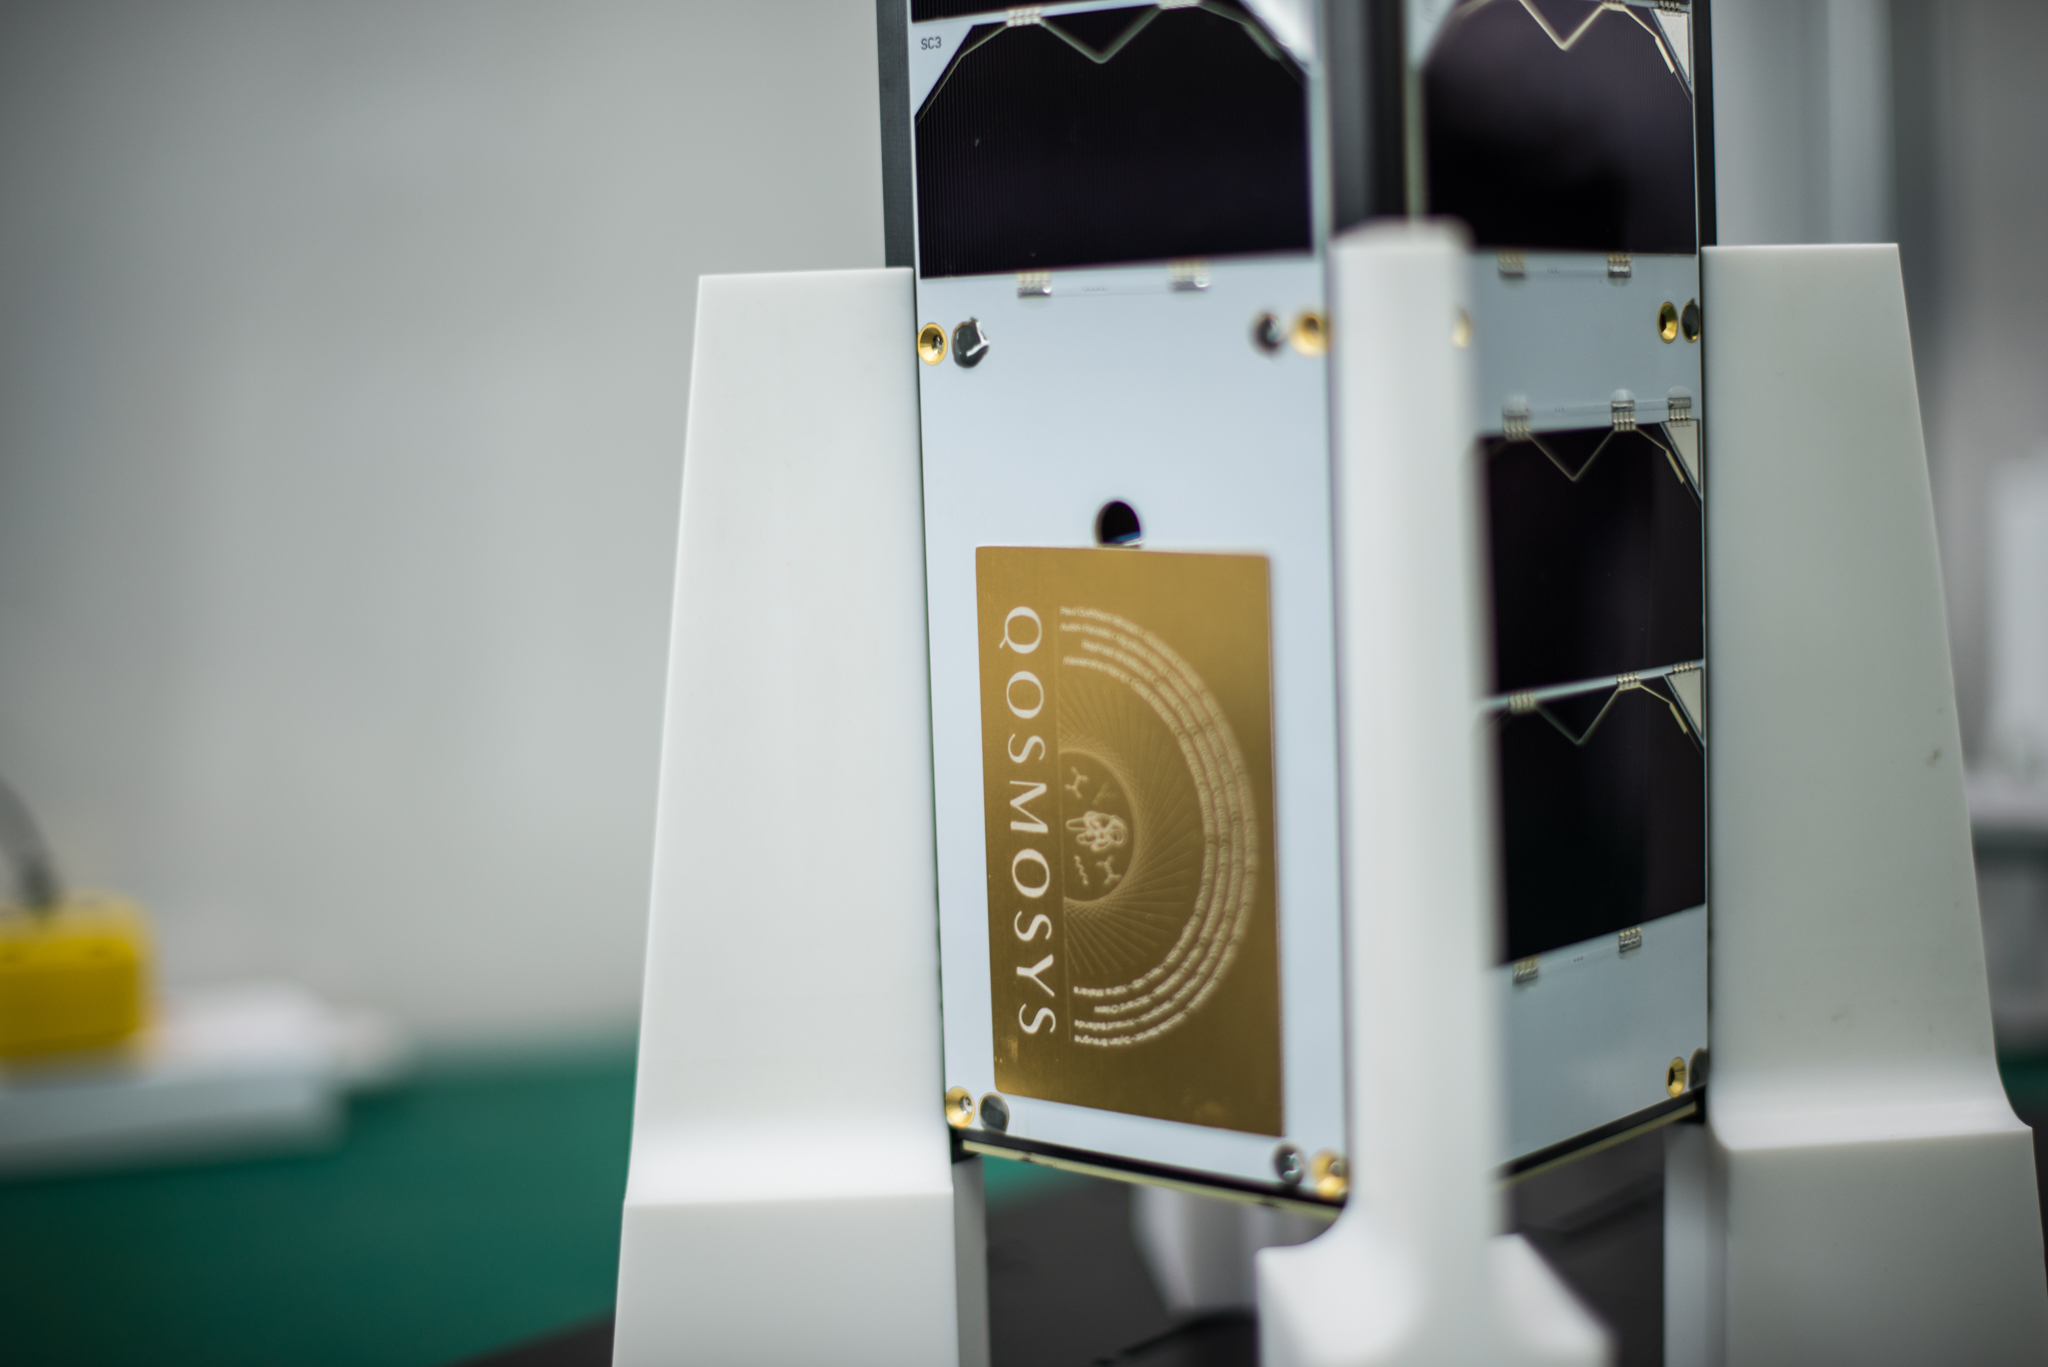 Focused Picture of Qosmosys Gold-Engraved Plate